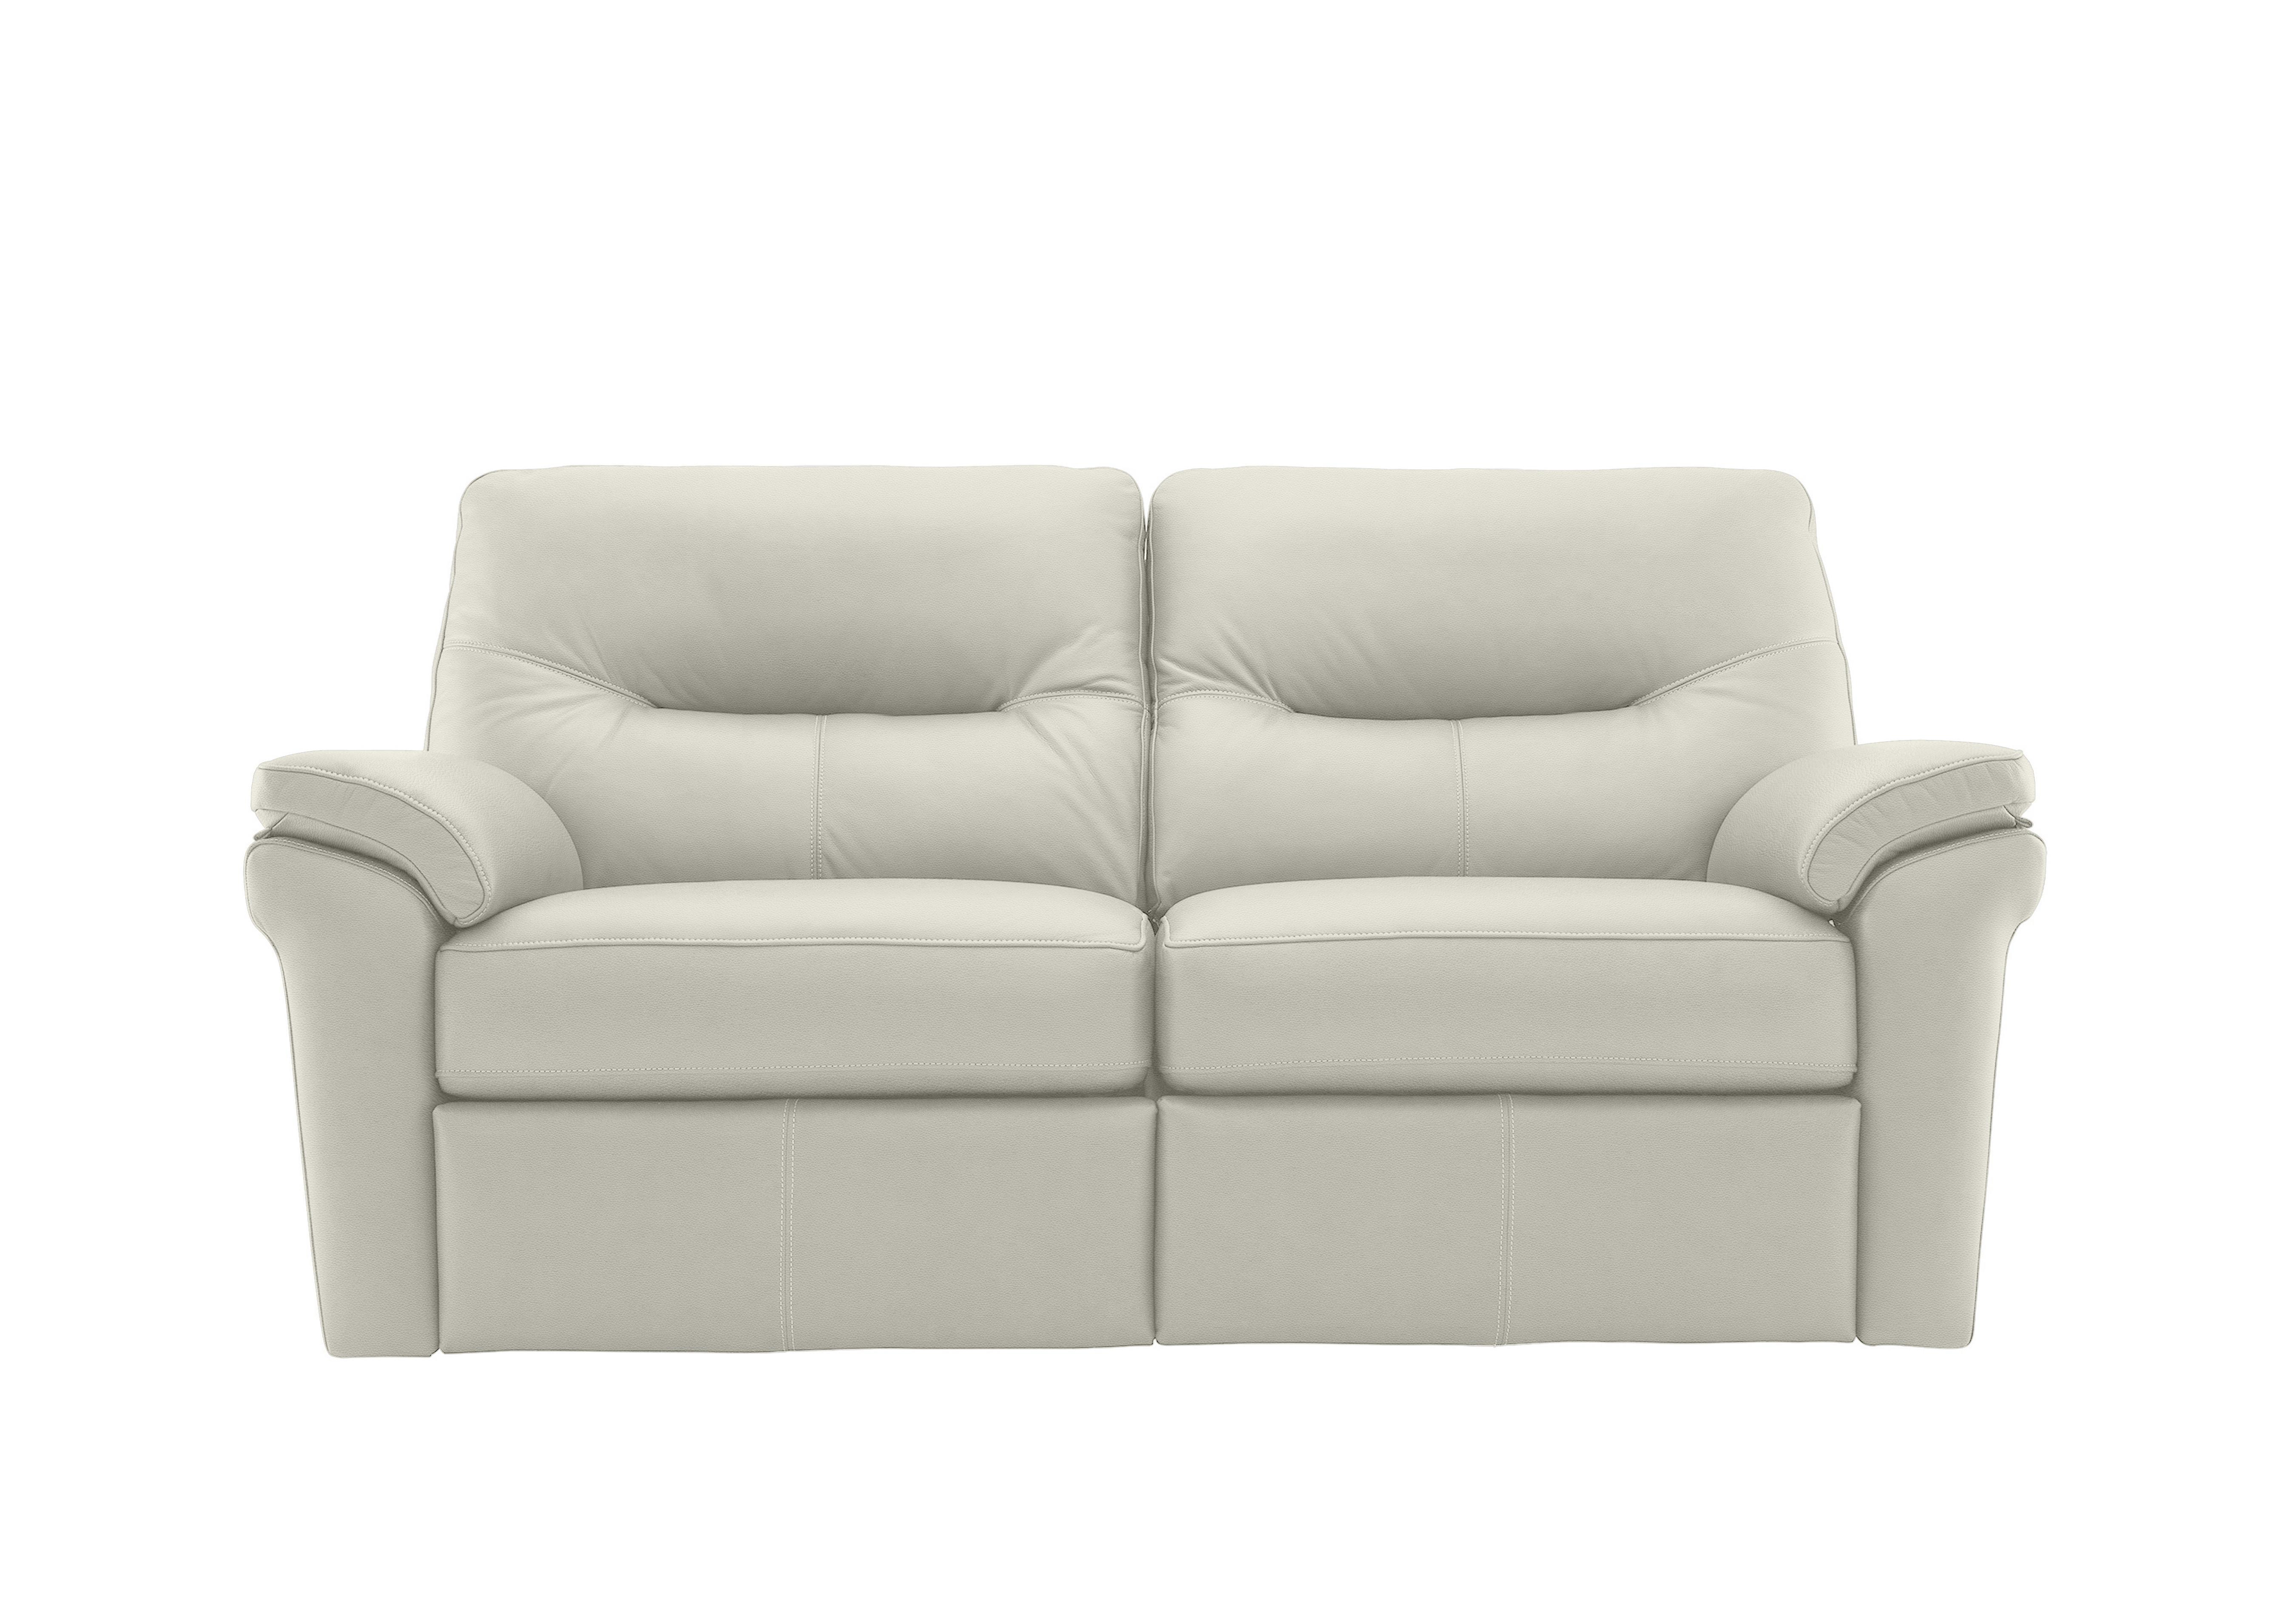 Seattle 2.5 Seater Leather Sofa in H005 Oxford Chalk on Furniture Village